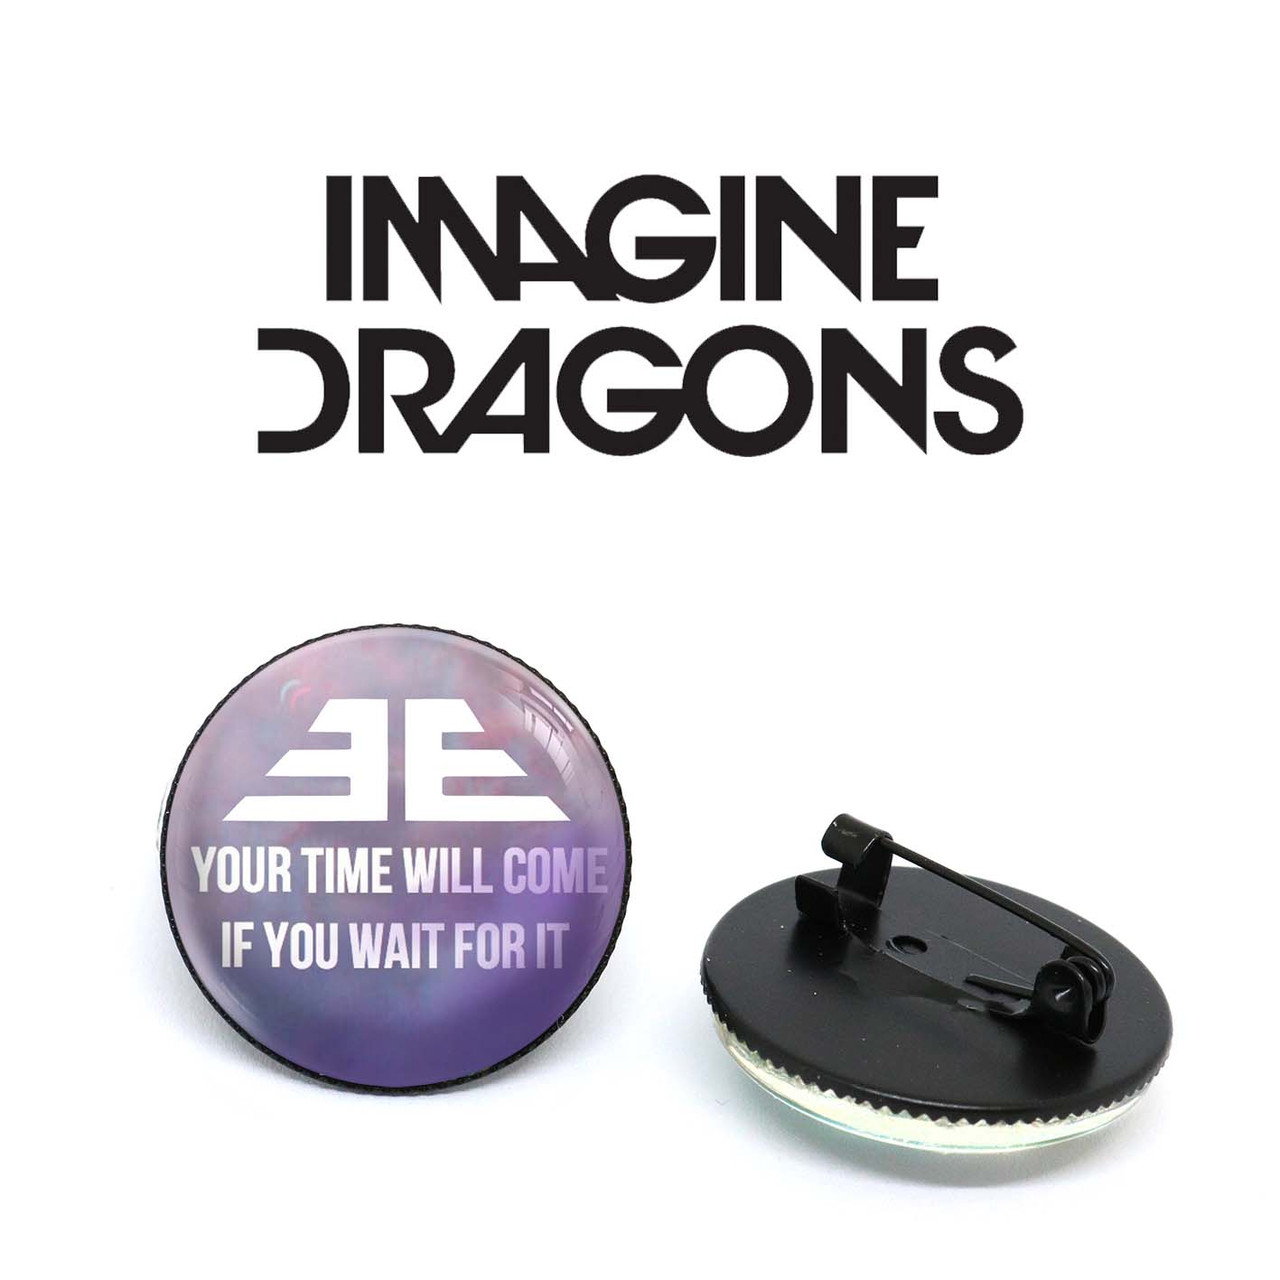 Значок Imagine Dragons "Your Time Will Come"